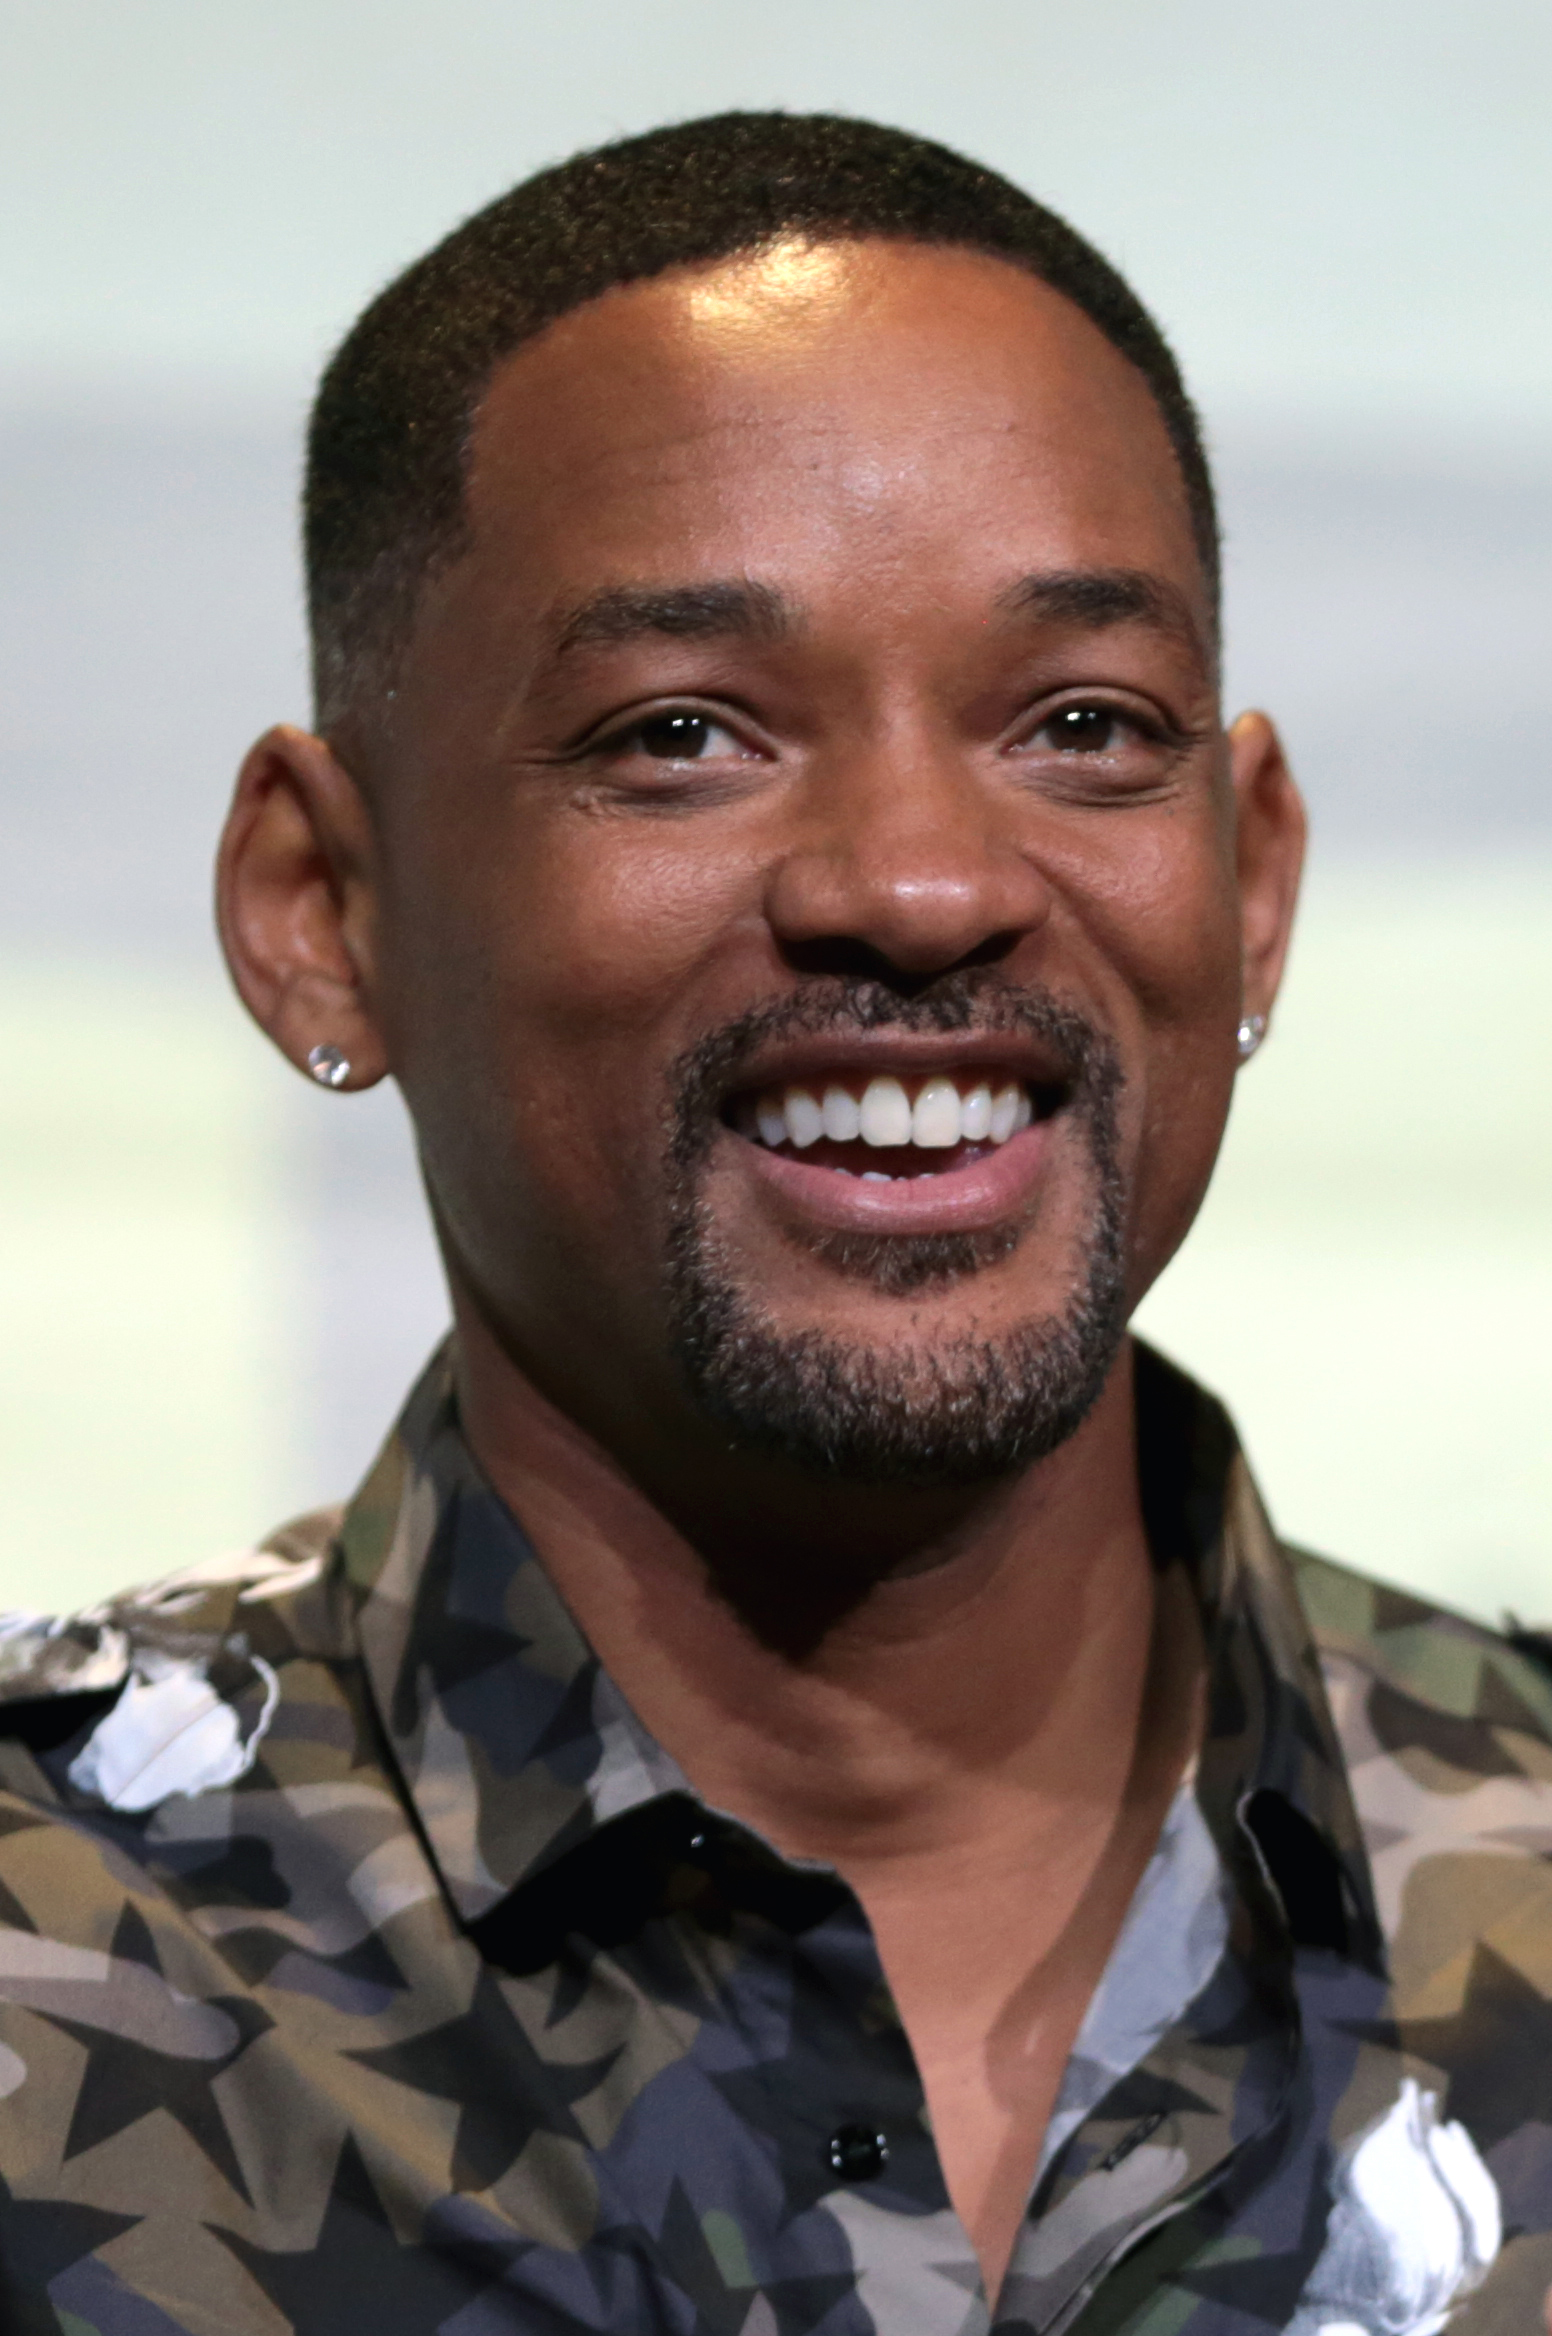 will_smith_by_gage_skidmore